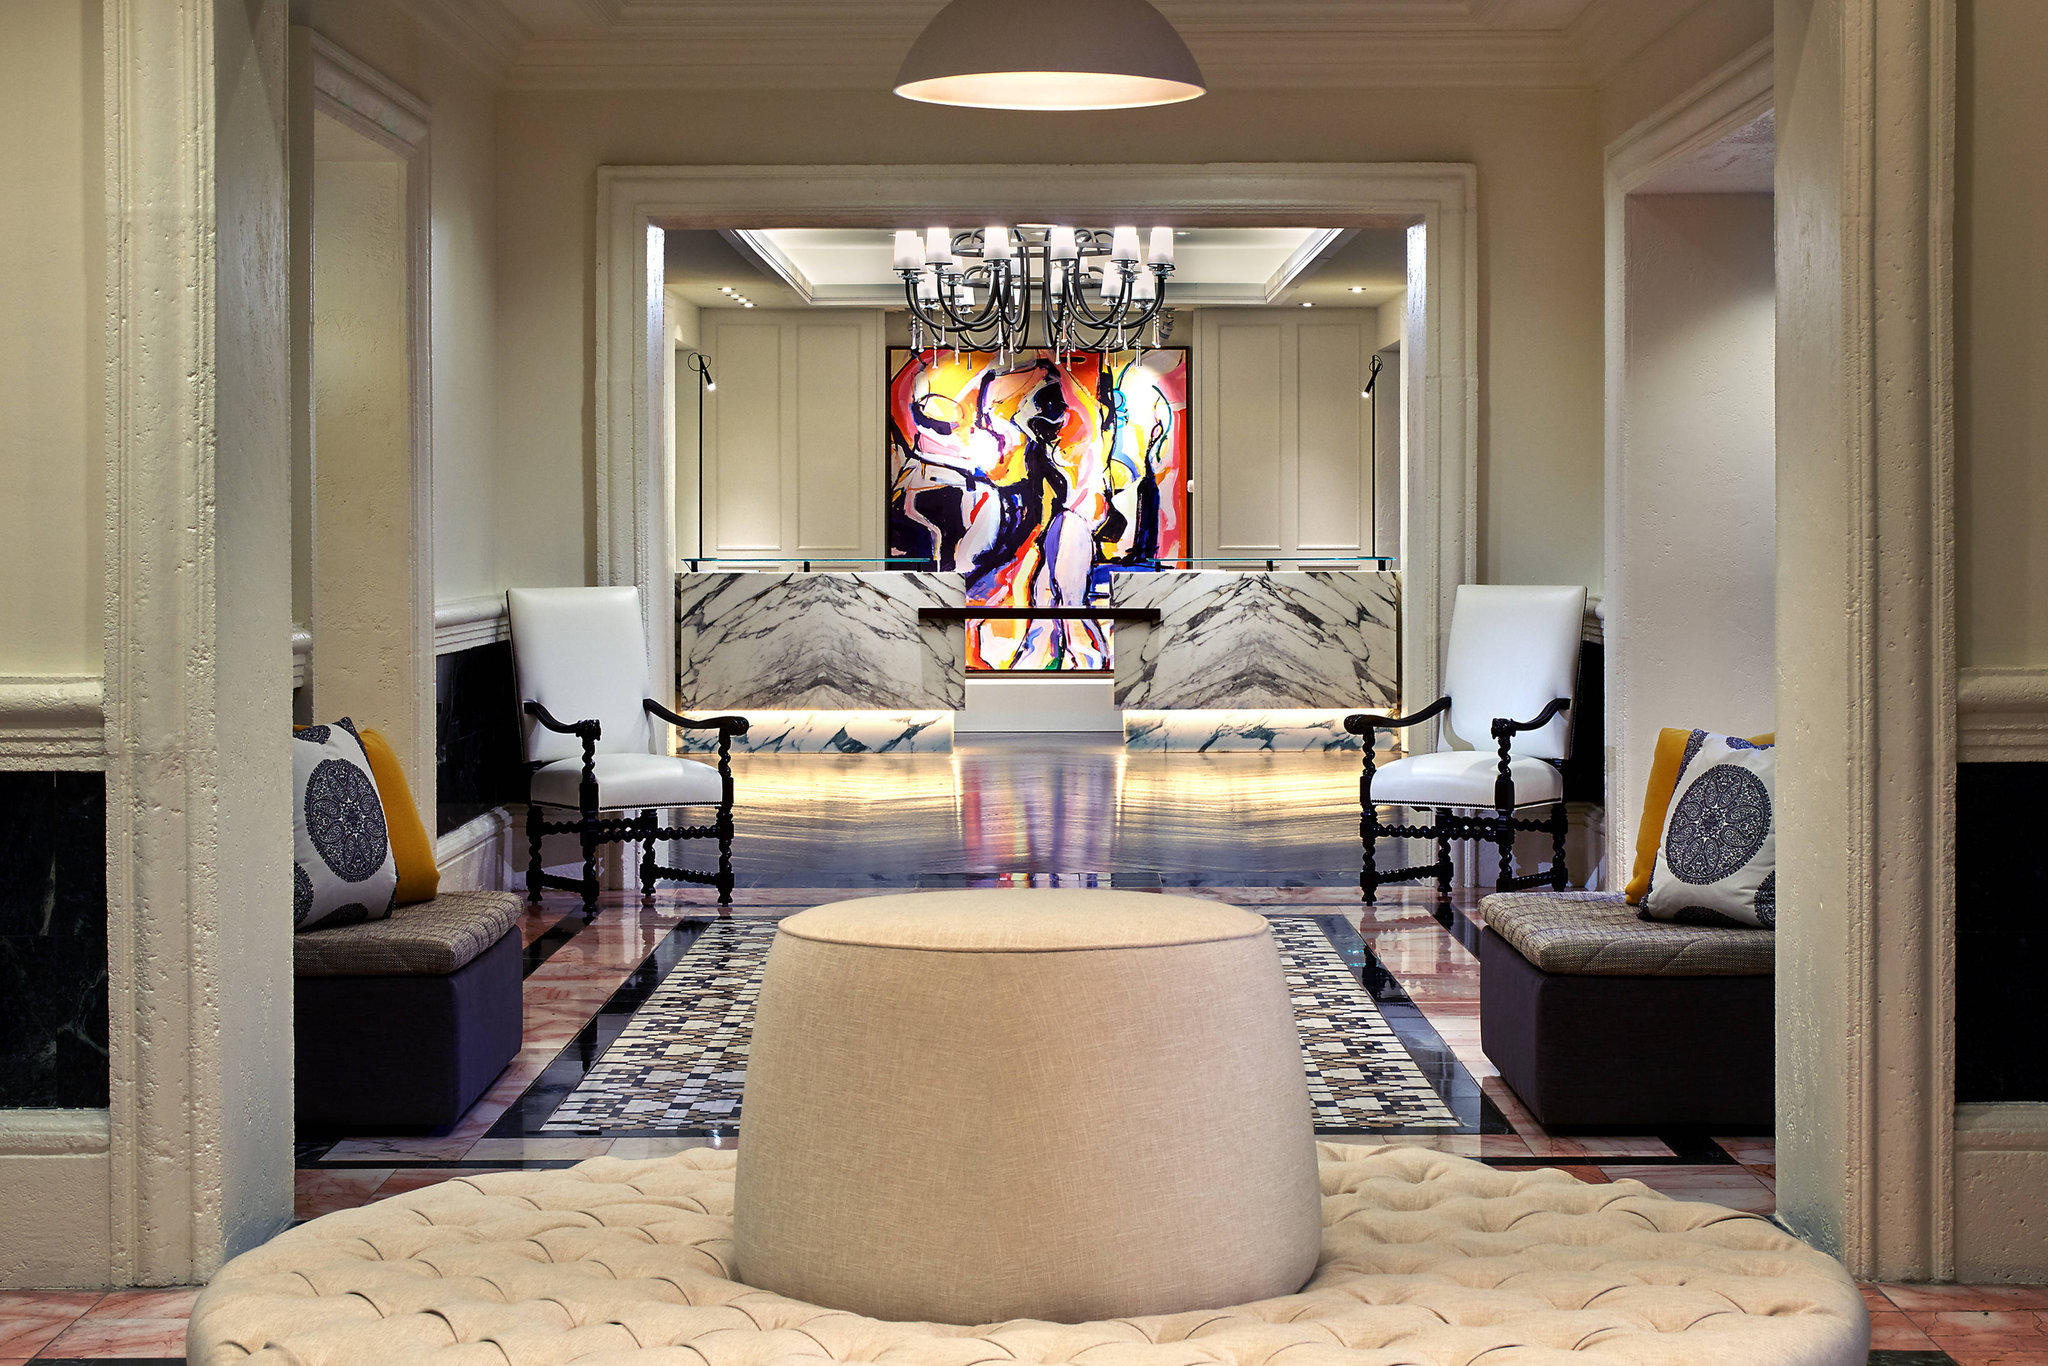 Hotel Colonnade Coral Gables, Autograph Collection Photo